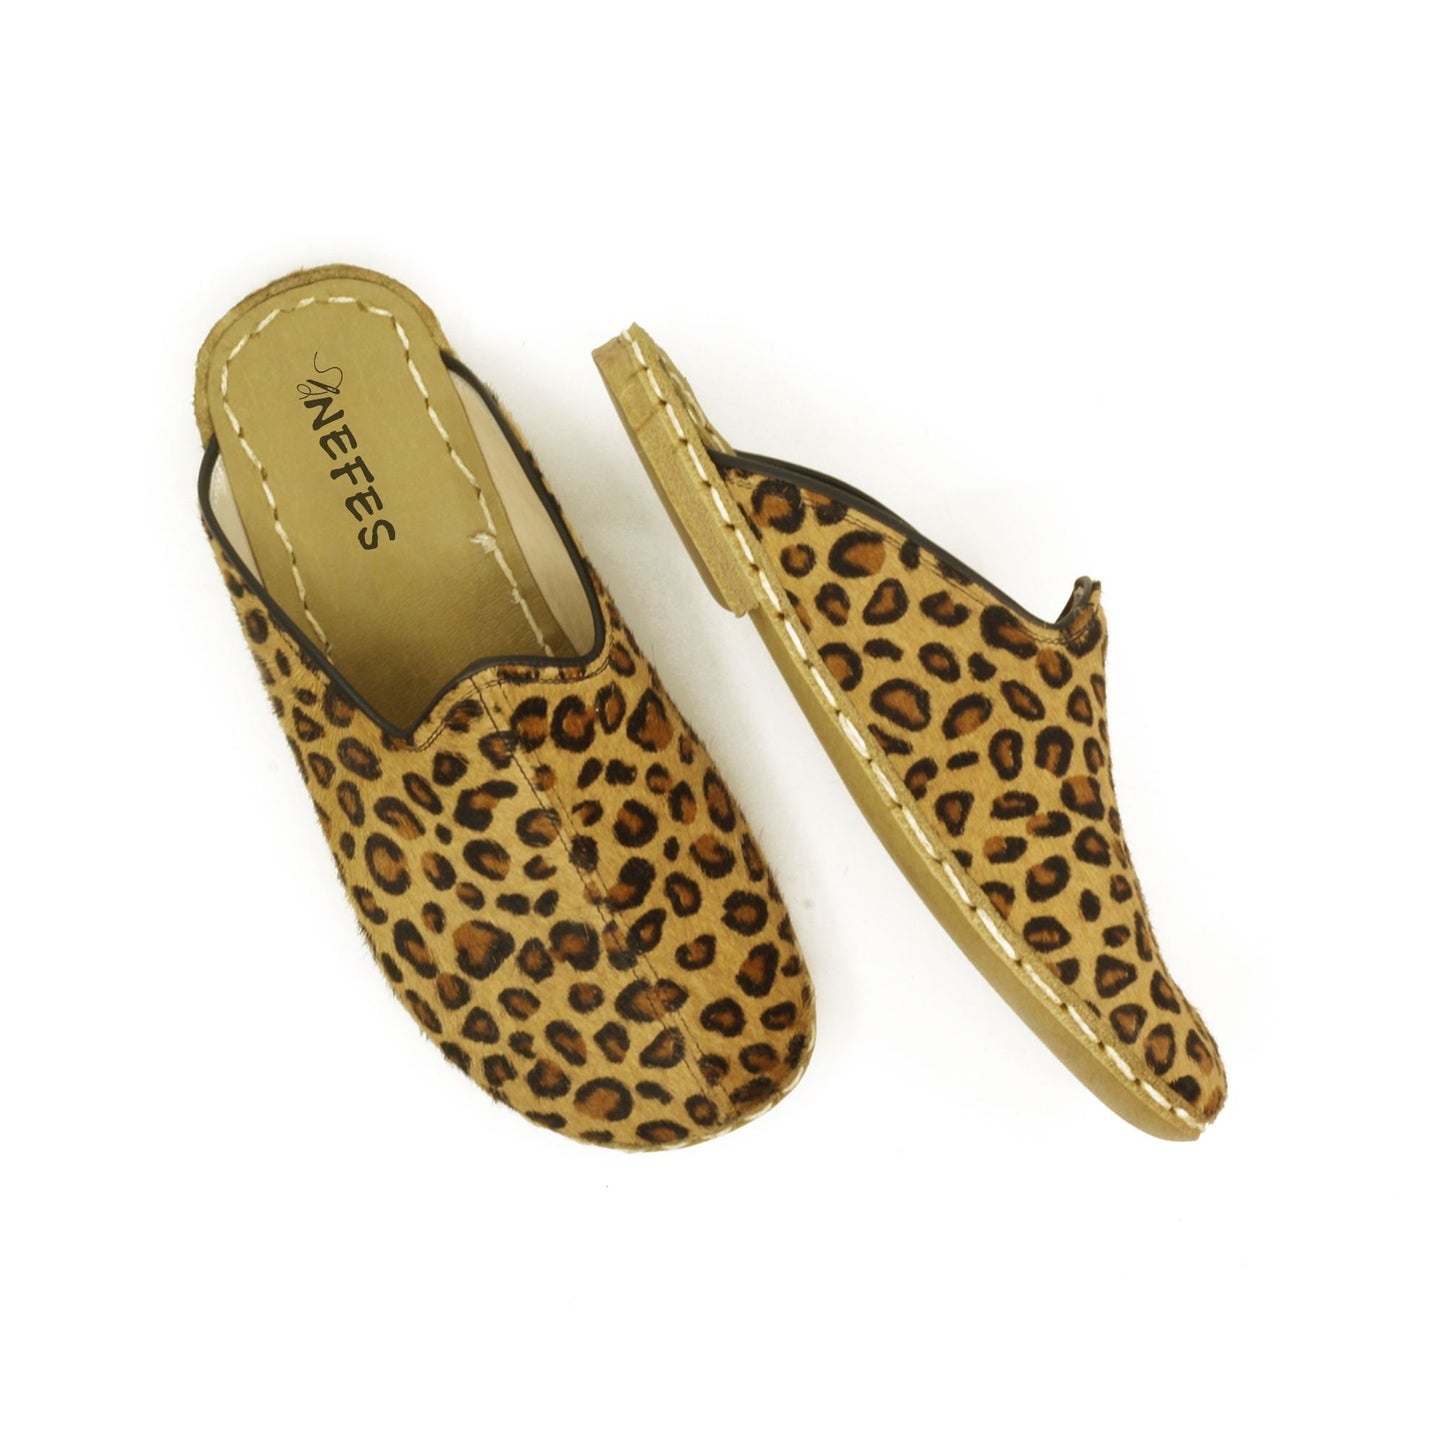 Closed Toe Leather Women's Slippers Leopard Print